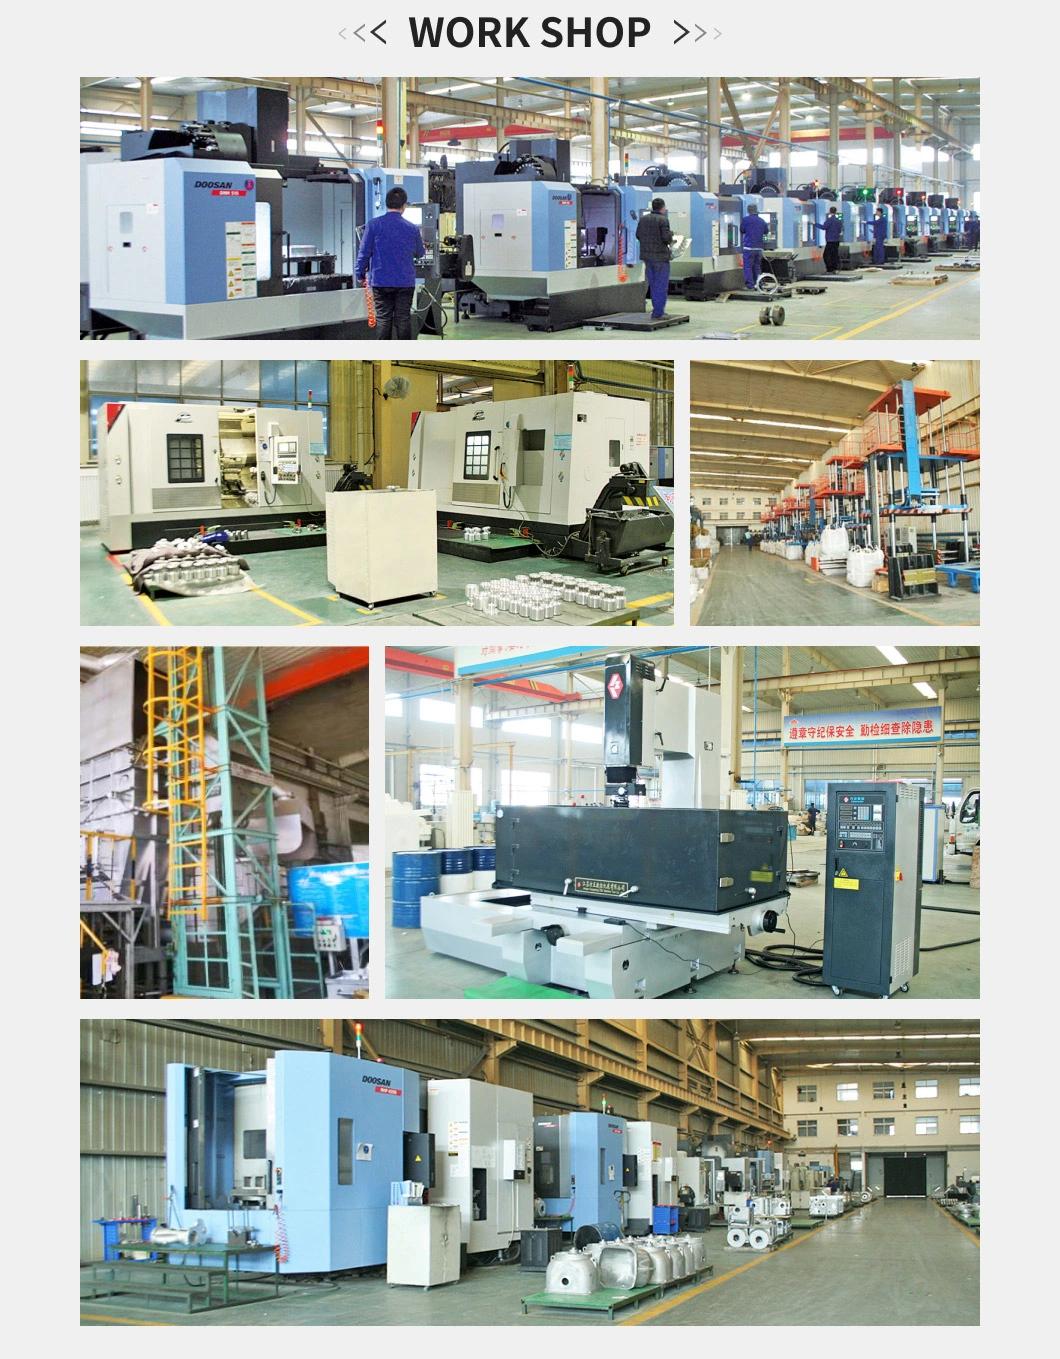 Takai OEM and ODM Customized Aluminum Die Casting for High Precision Auto Engines Manufacturer